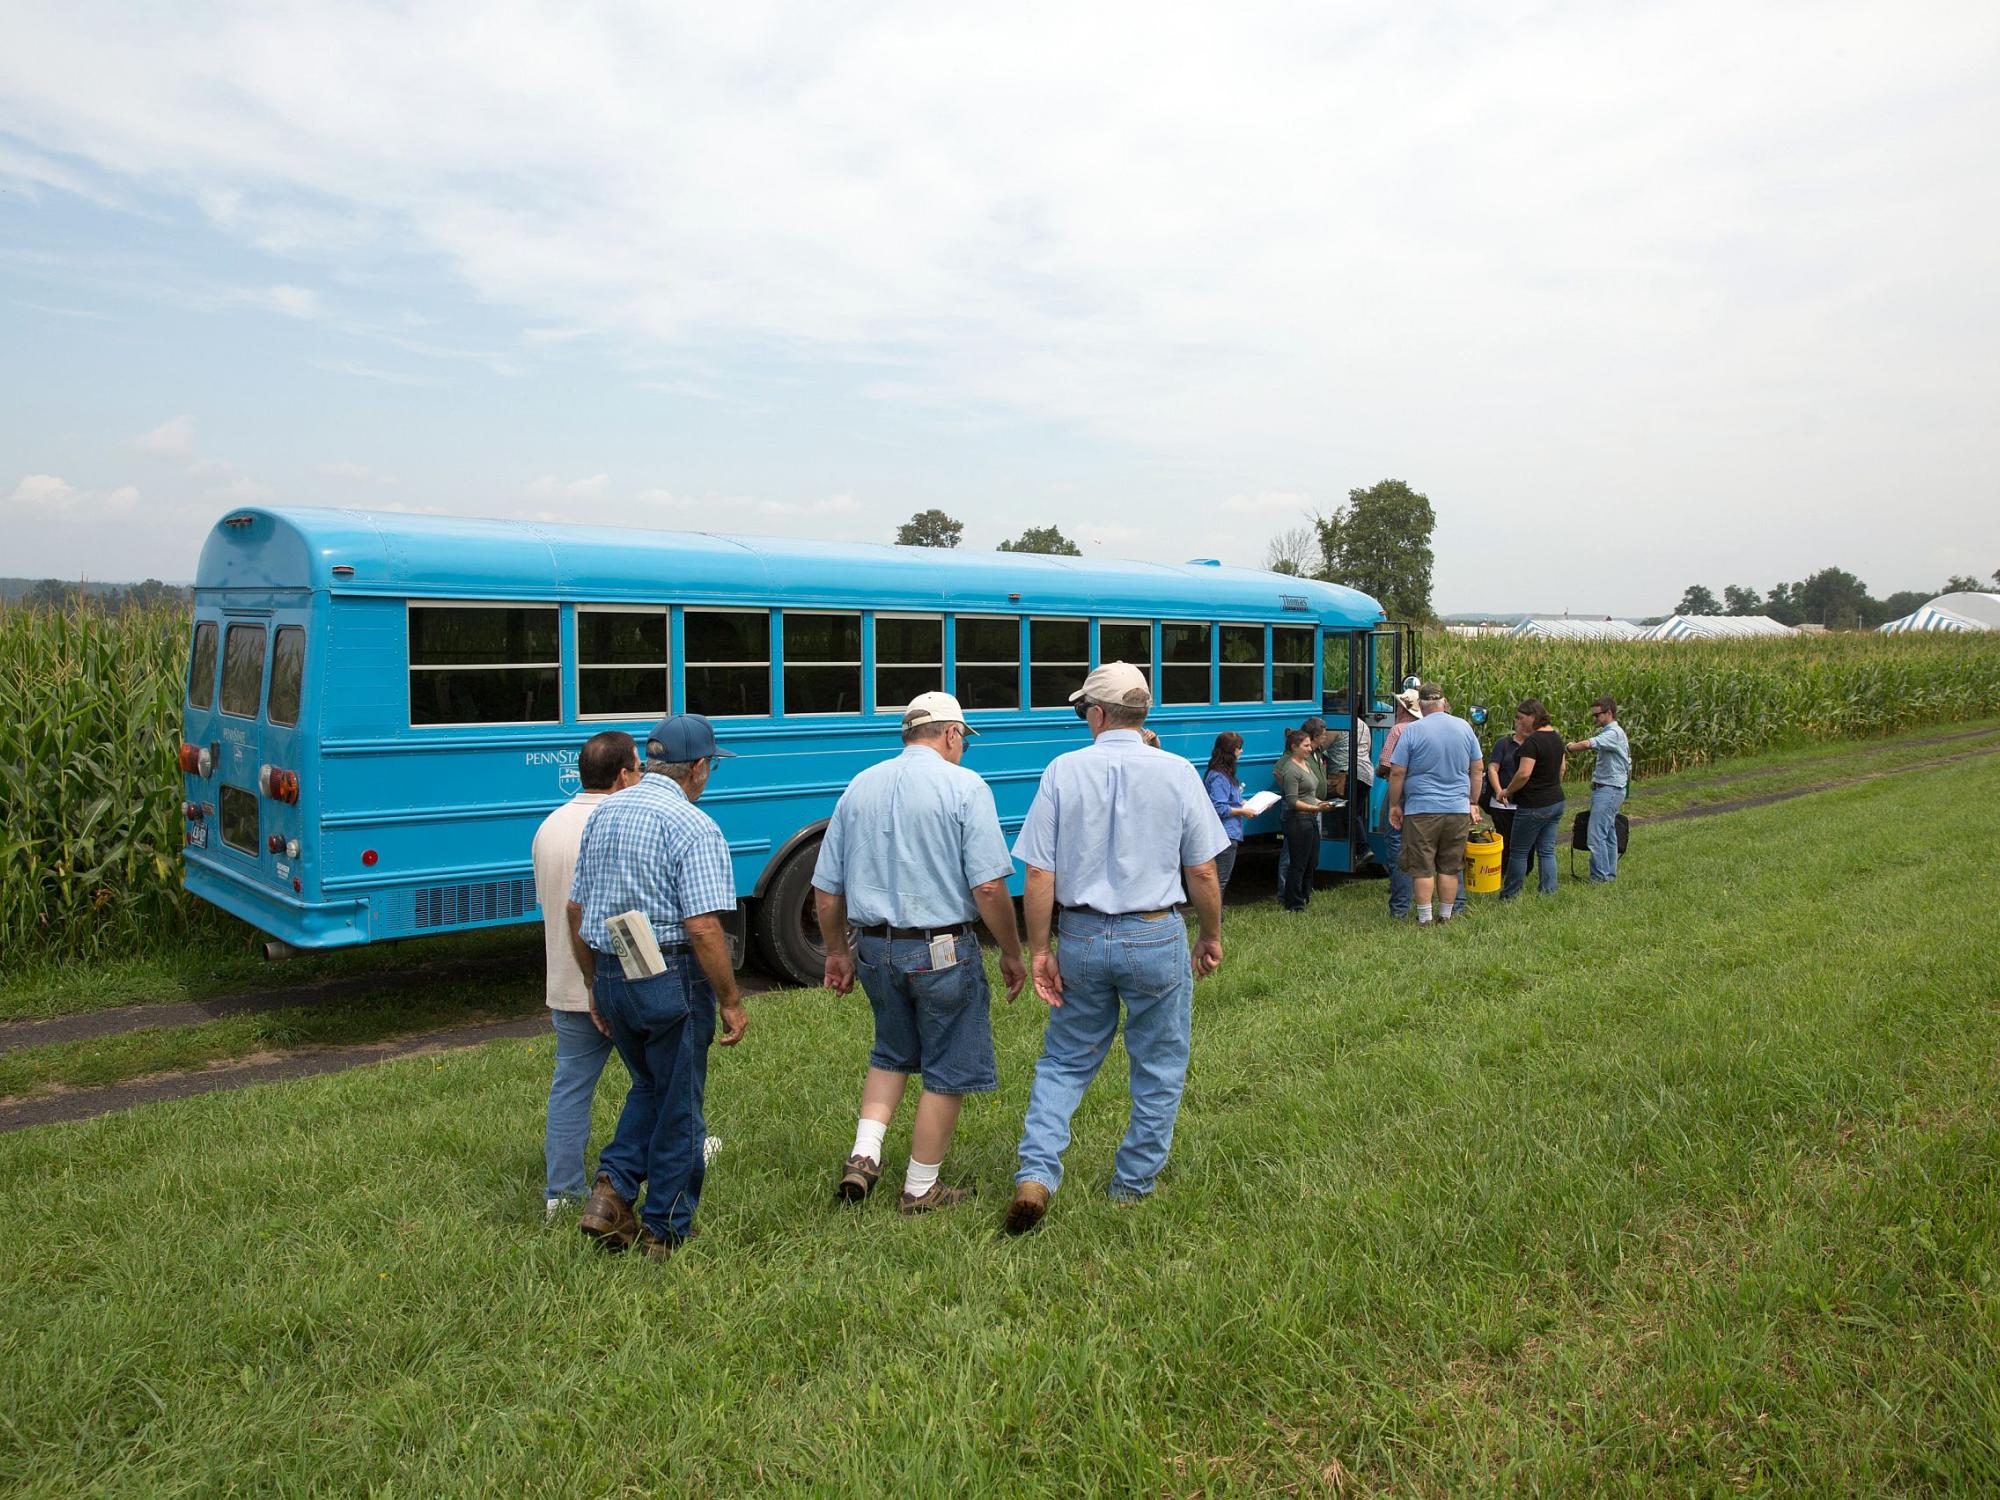 Ag Progress Days tours cover livestock, forest management, water quality